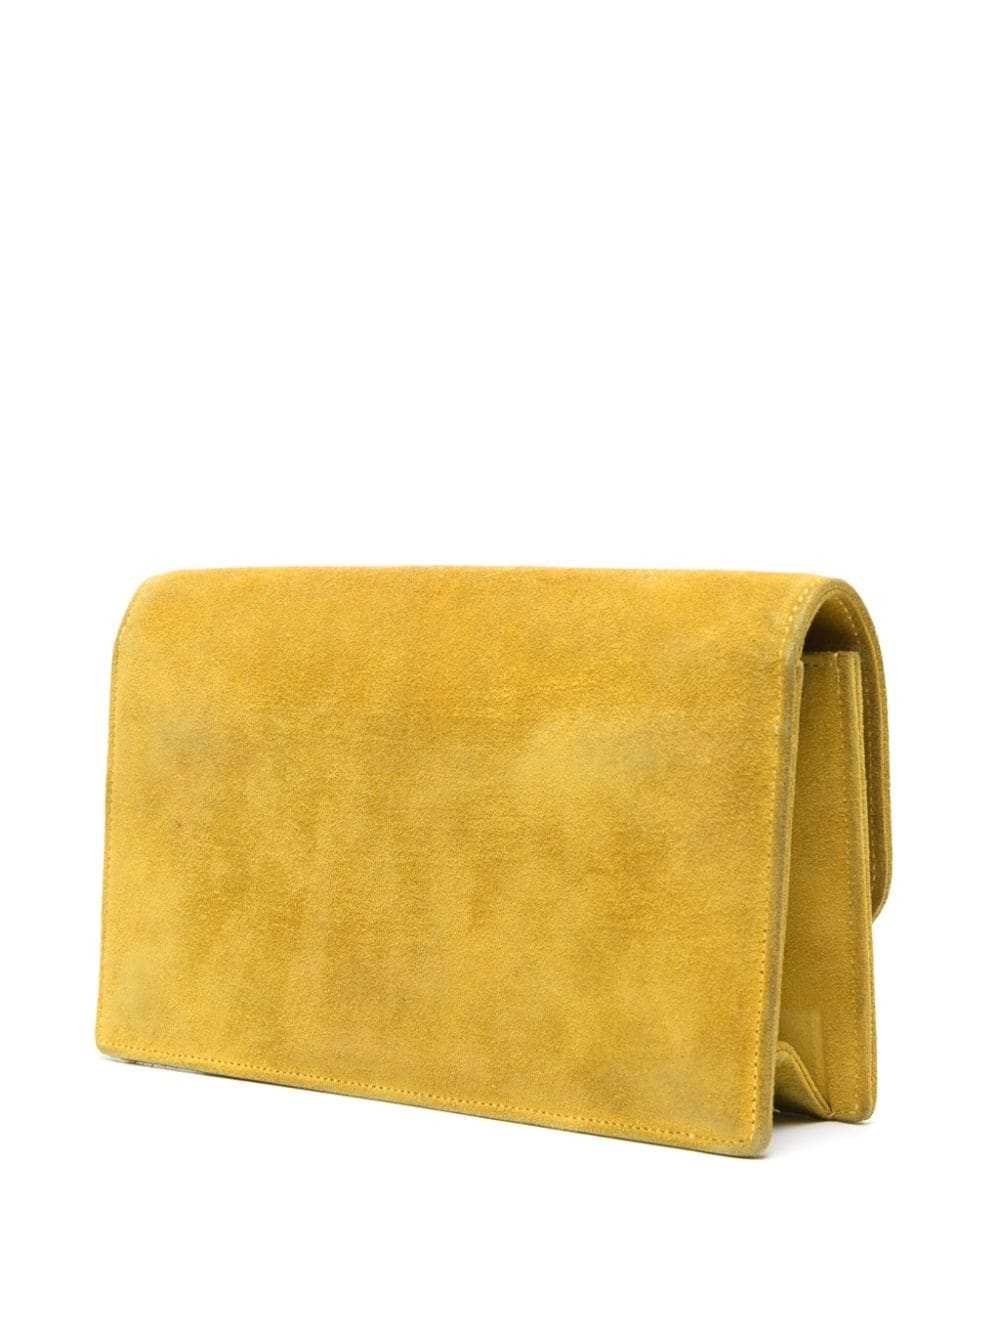 Hermès Pre-Owned 1970's clutch bag - Yellow - image 3